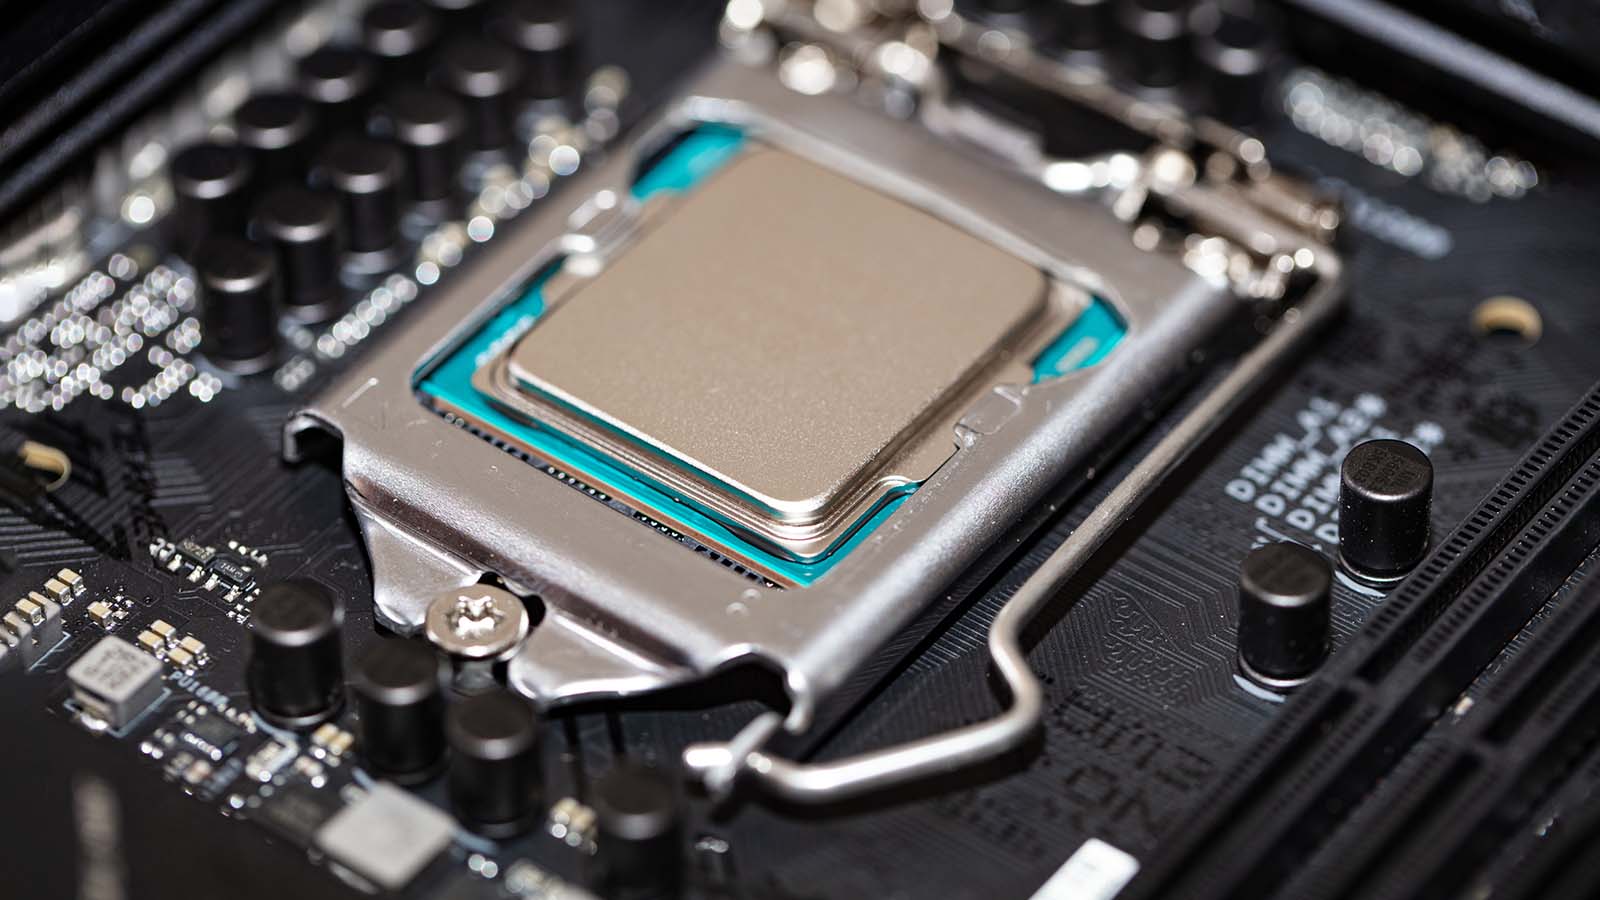 Best CPUs for RTX 3070